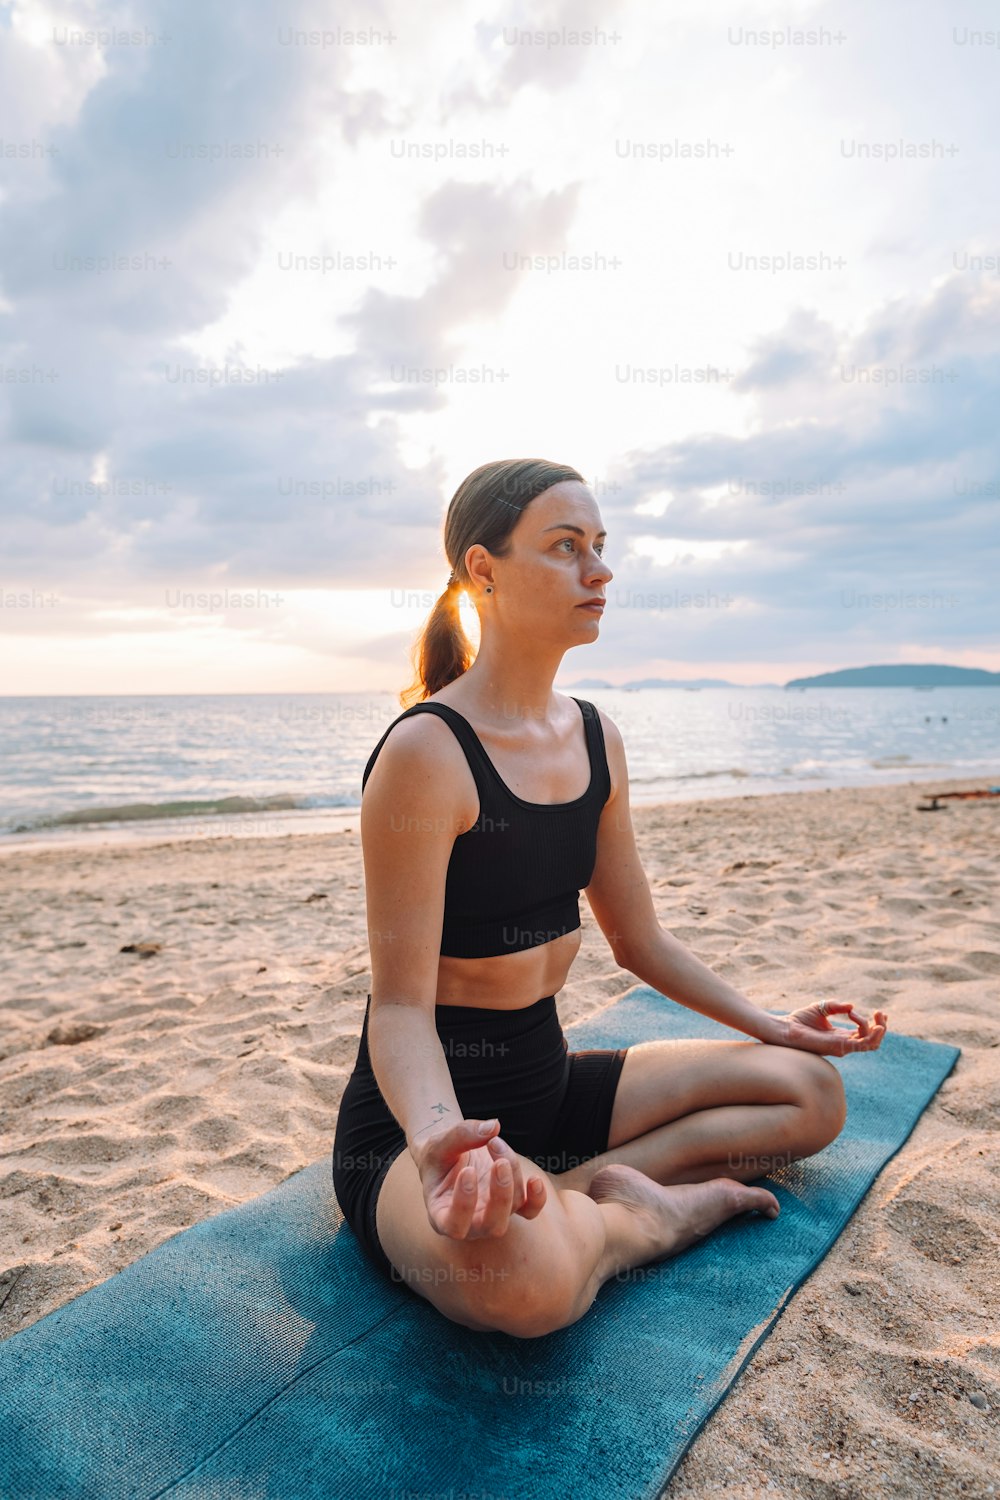 a woman sitting in a yoga position on a towel on the beach